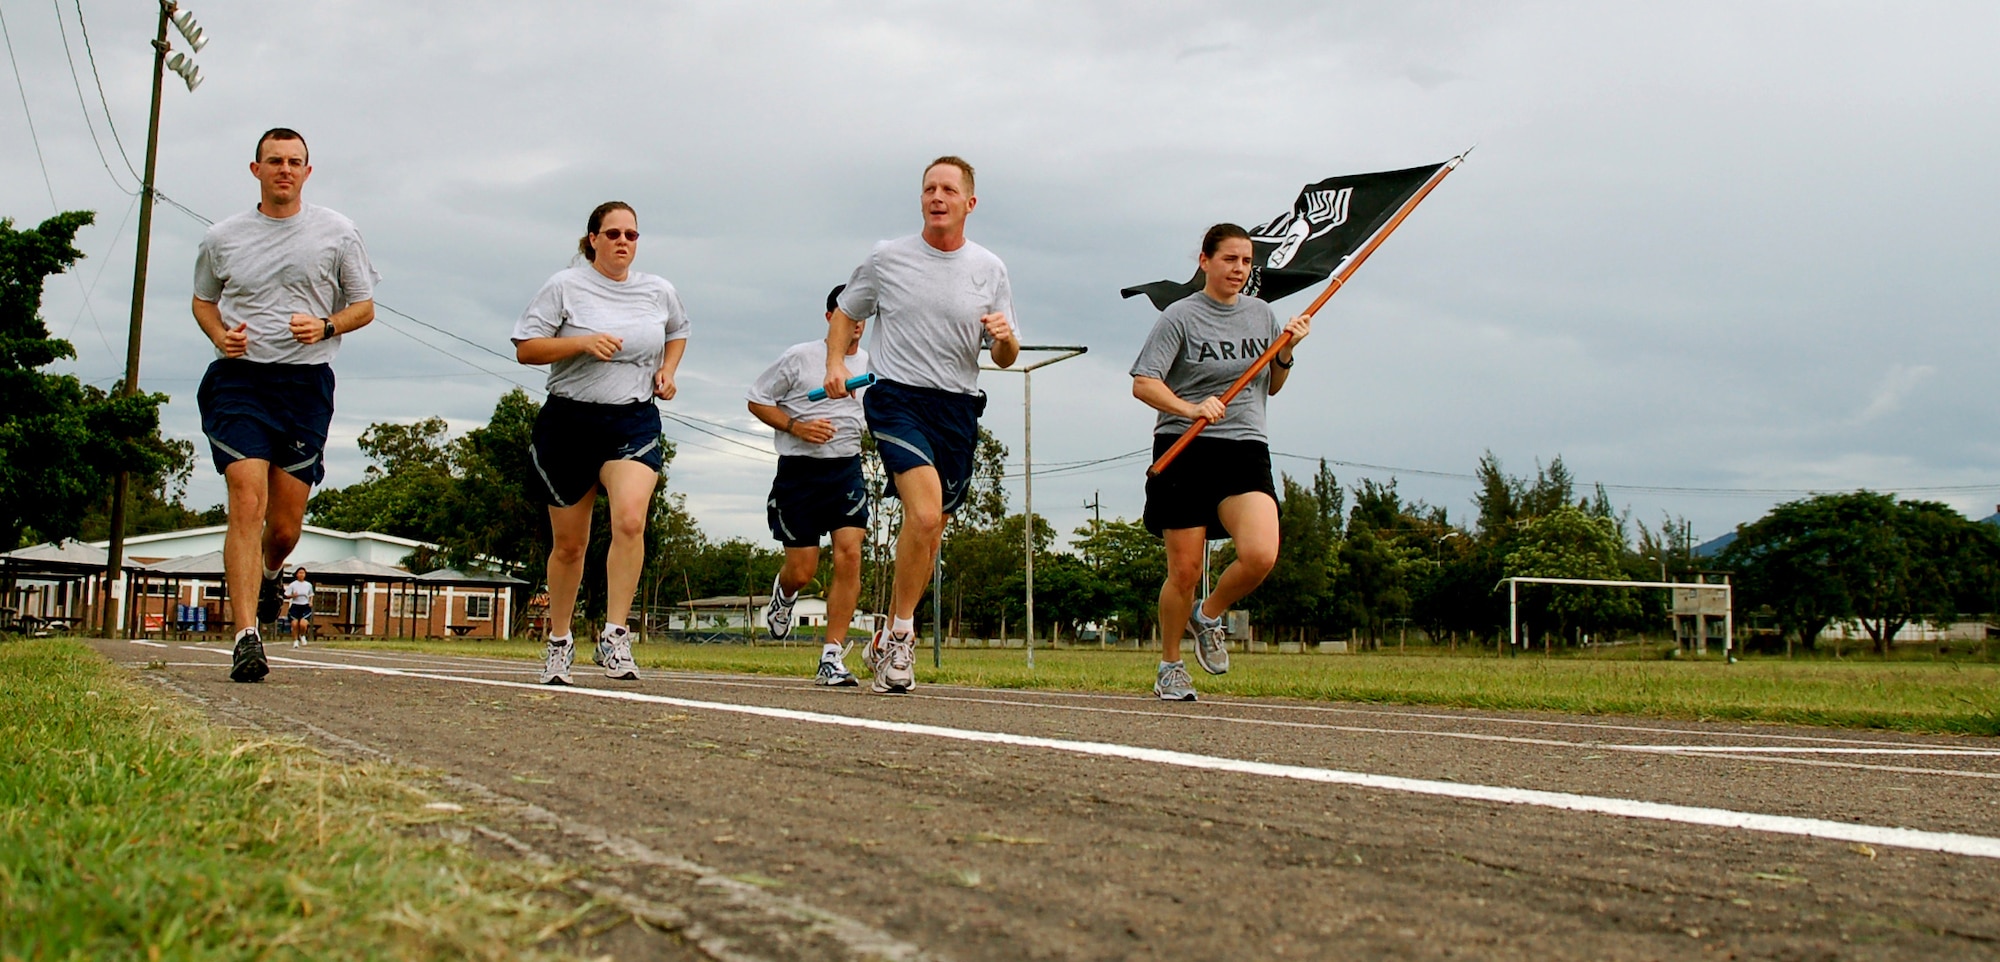 SOTO CANO AIR BASE, Honduras – The first group of runners in the Joint Task Force-Bravo Prisoner of War/Missing in Action 24-hour Remembrance Run complete their first lap at about 9:02 a.m. Oct. 11.  A total of approximately 170 participants ran in mostly 15-minute intervals for 24 hours to show support for their fellow servicemembers who have been listed as POW/MIA.  (U.S. Air Force photo by Staff Sgt. Austin M. May)